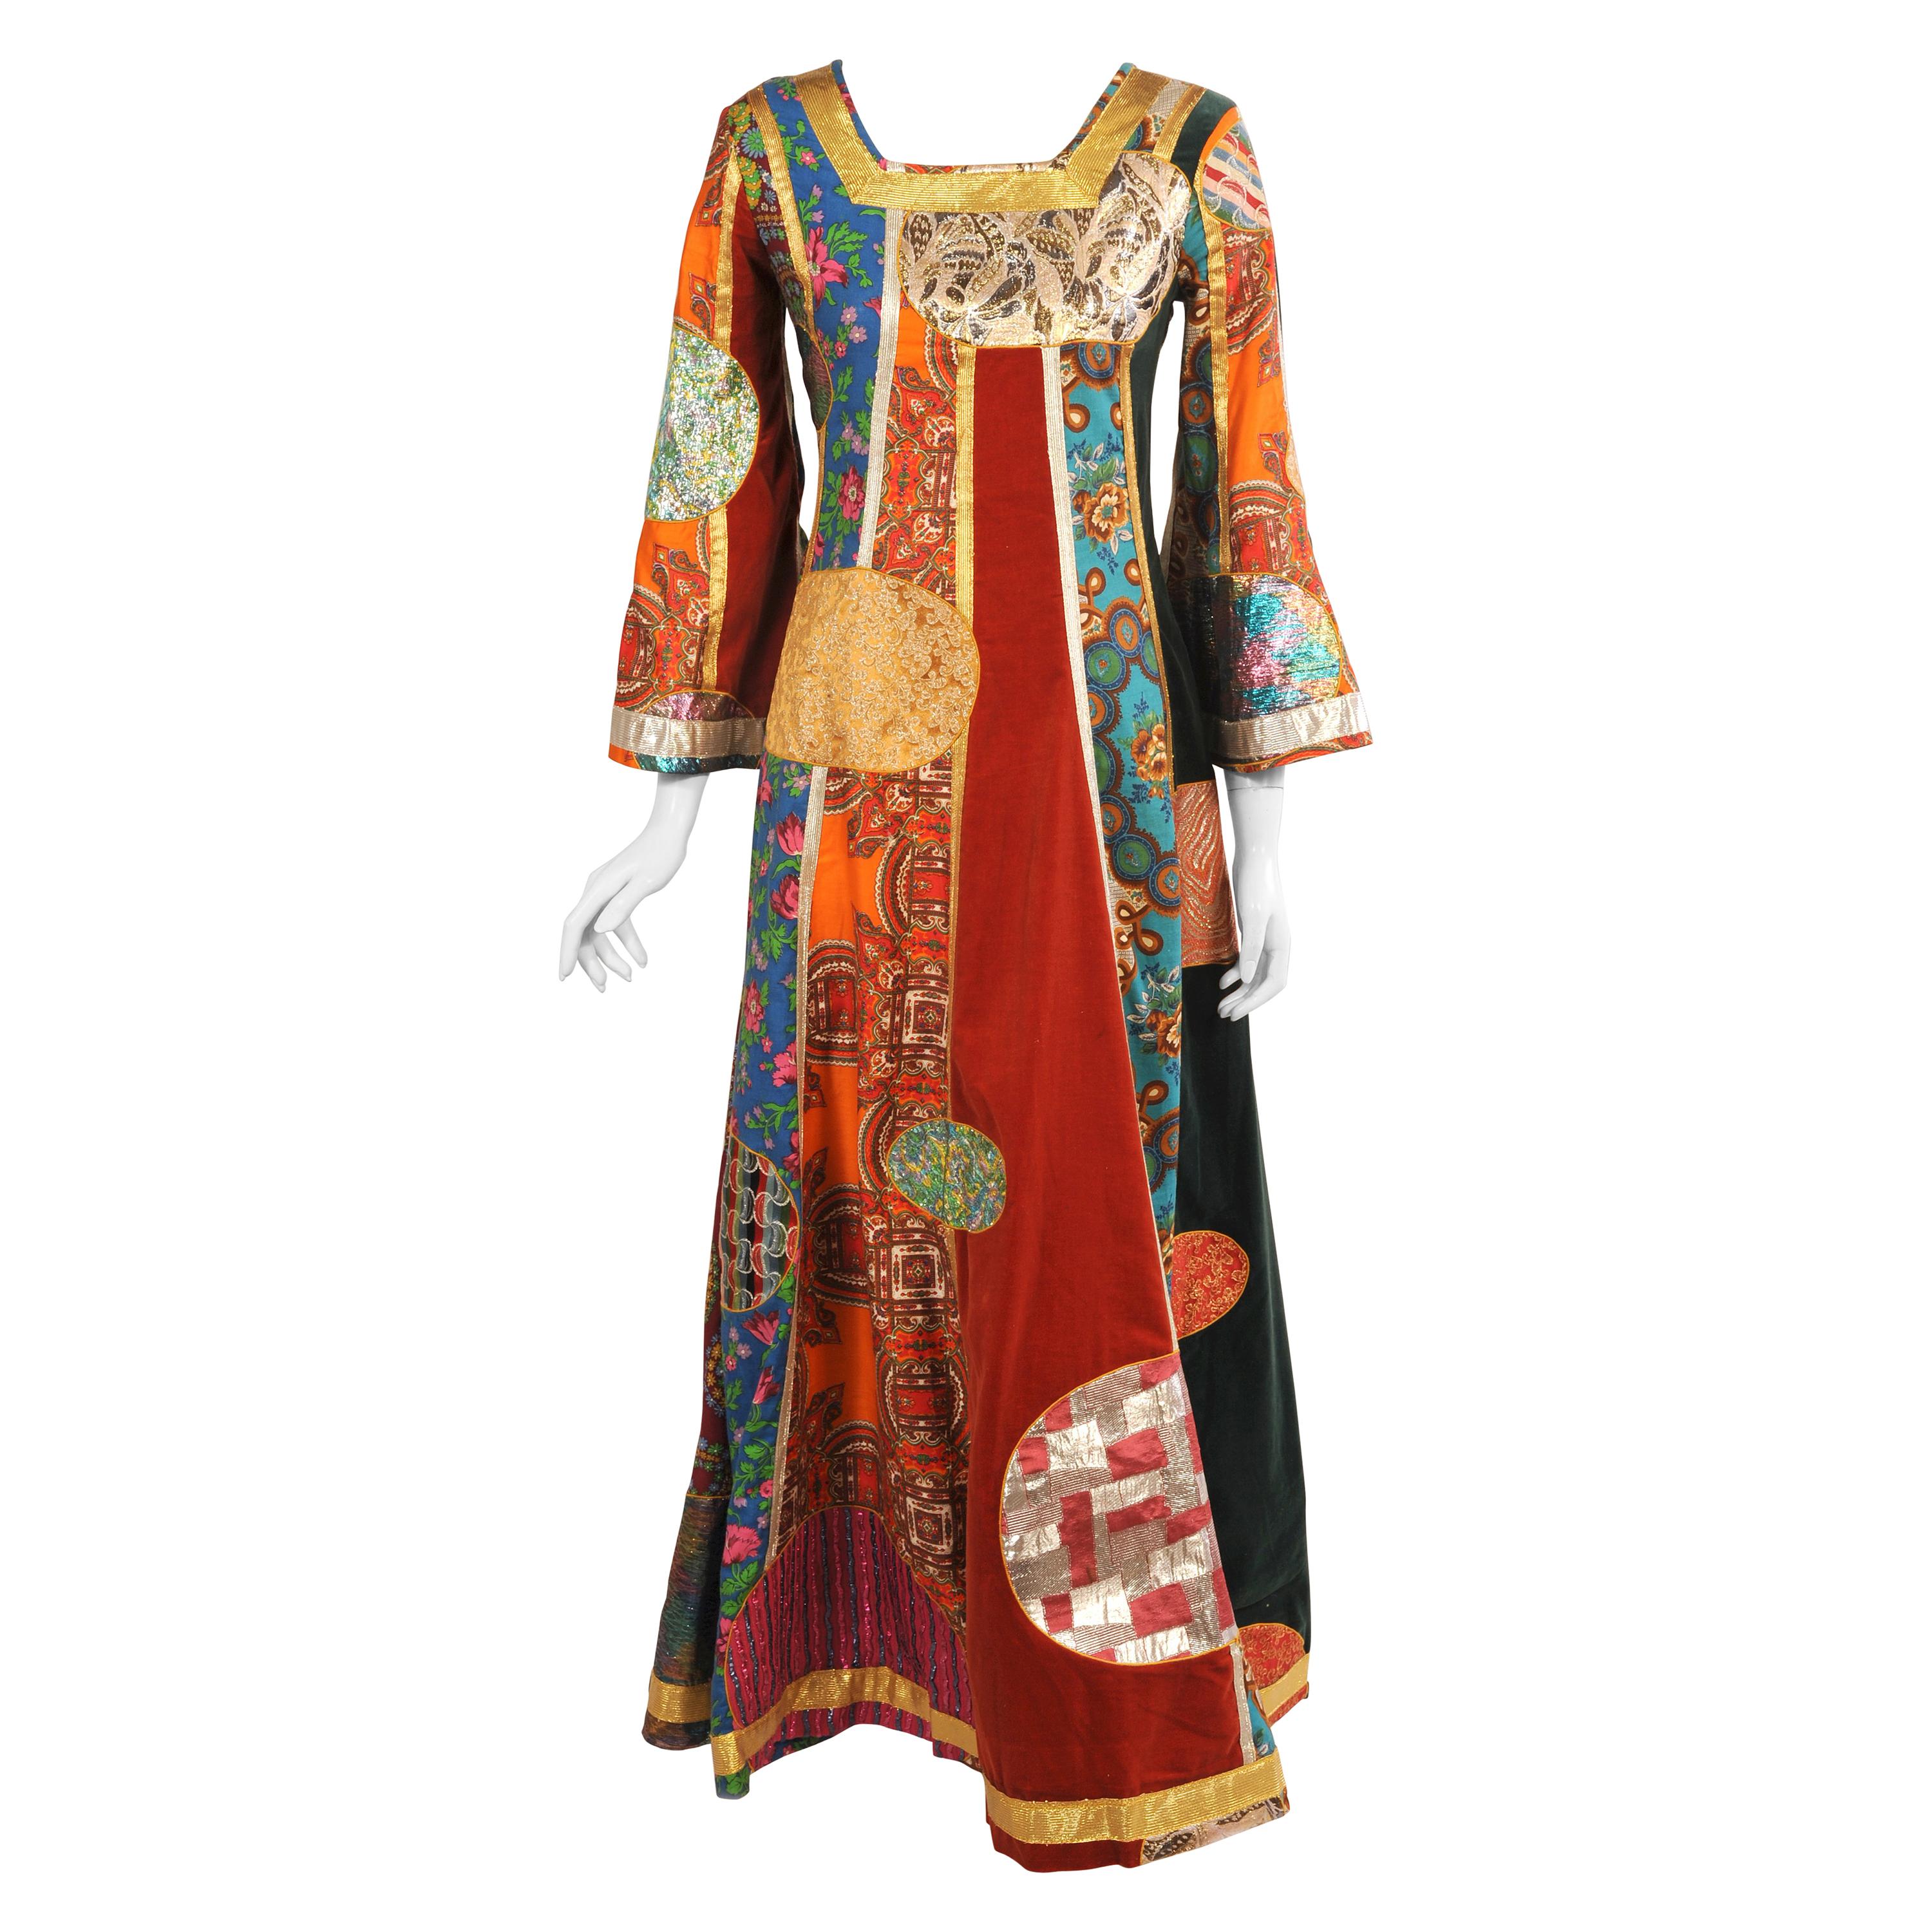 Giorgio di Sant Angelo Patchwork Klimt Dress in Multiple Museums, 1969